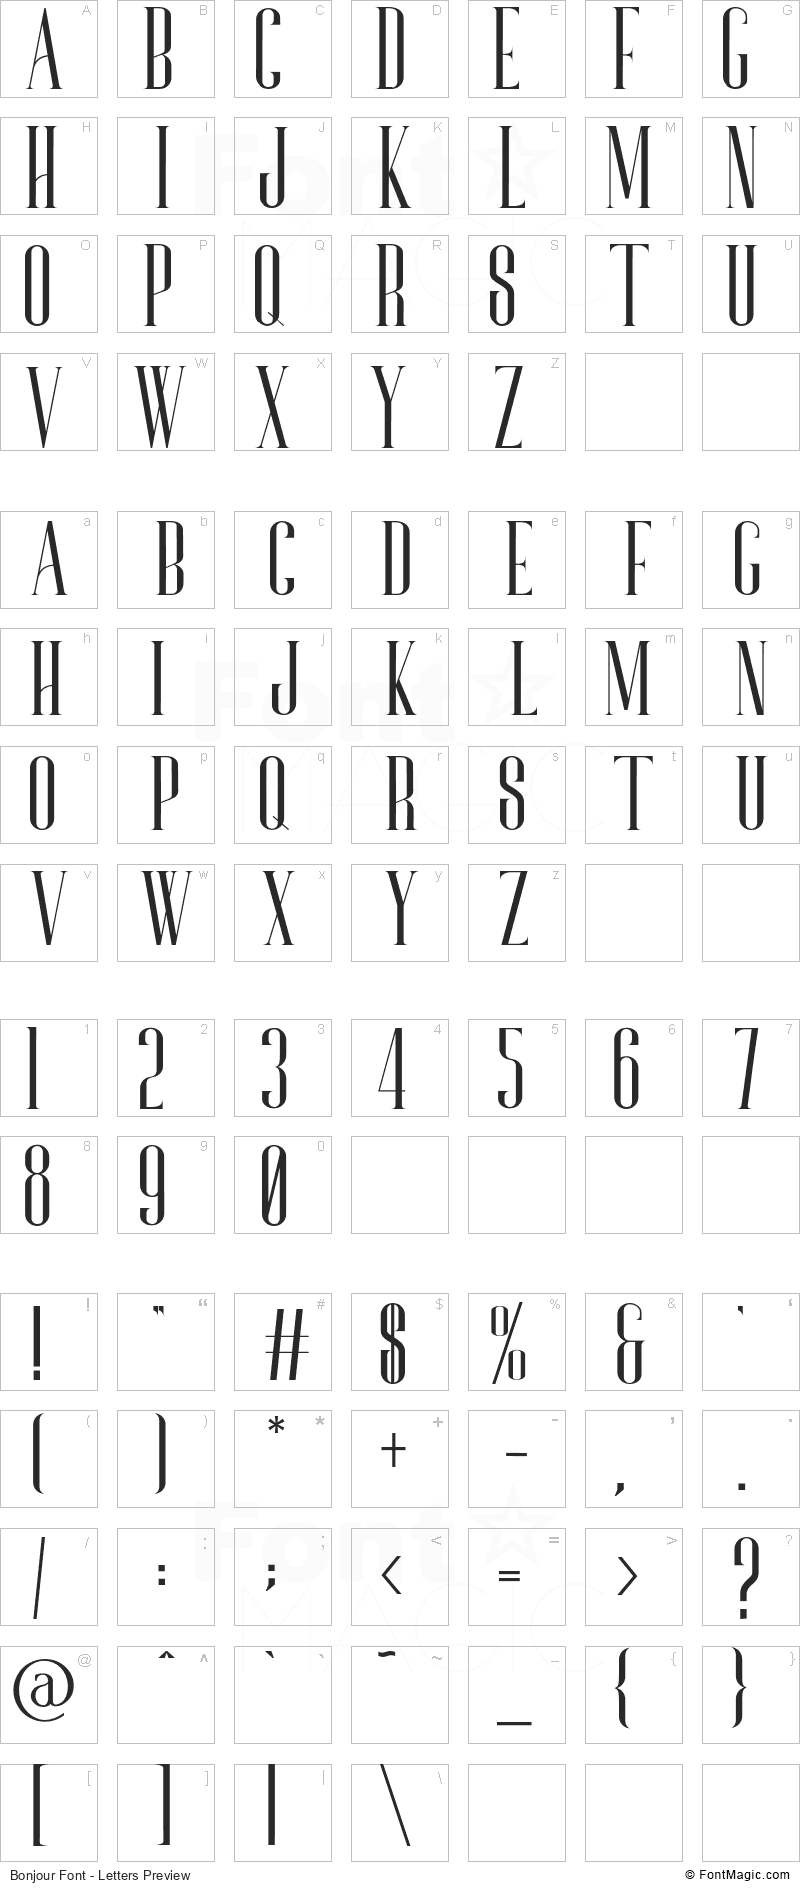 Bonjour Font - All Latters Preview Chart